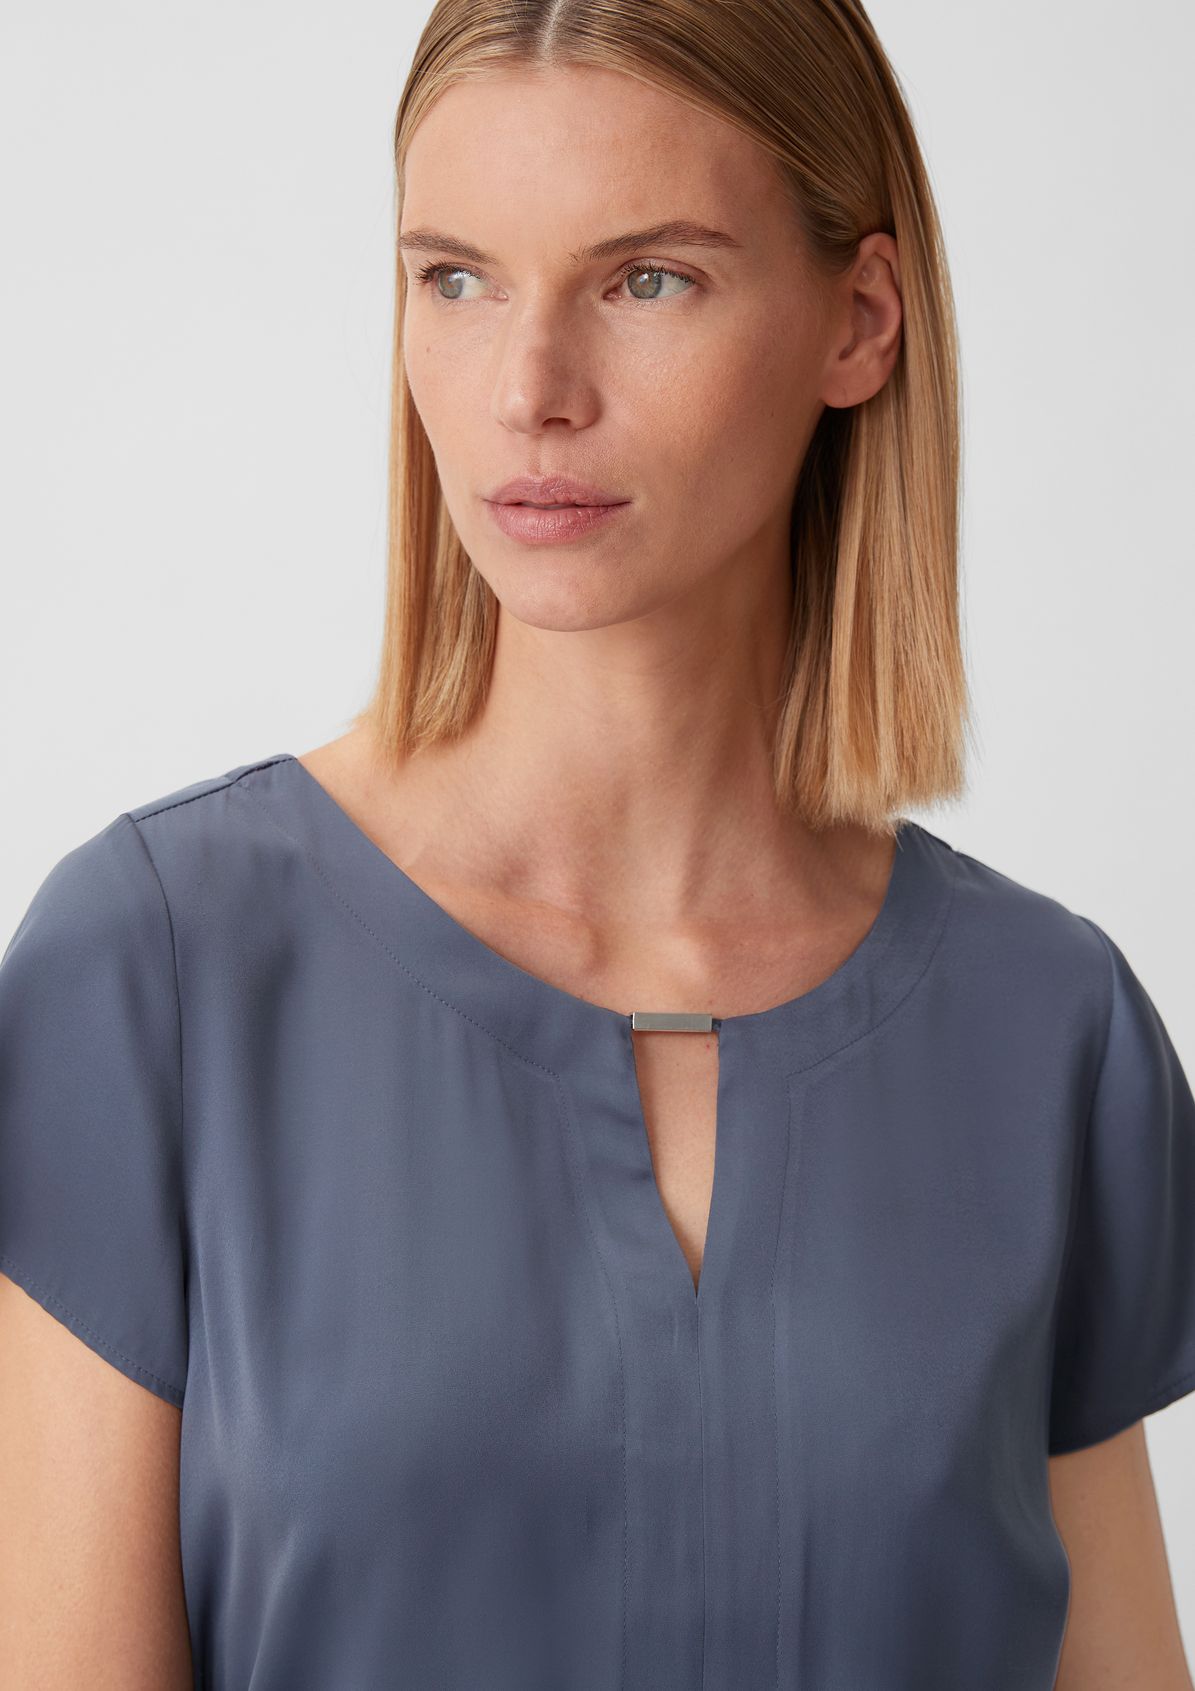 Blouse top made of satin from comma